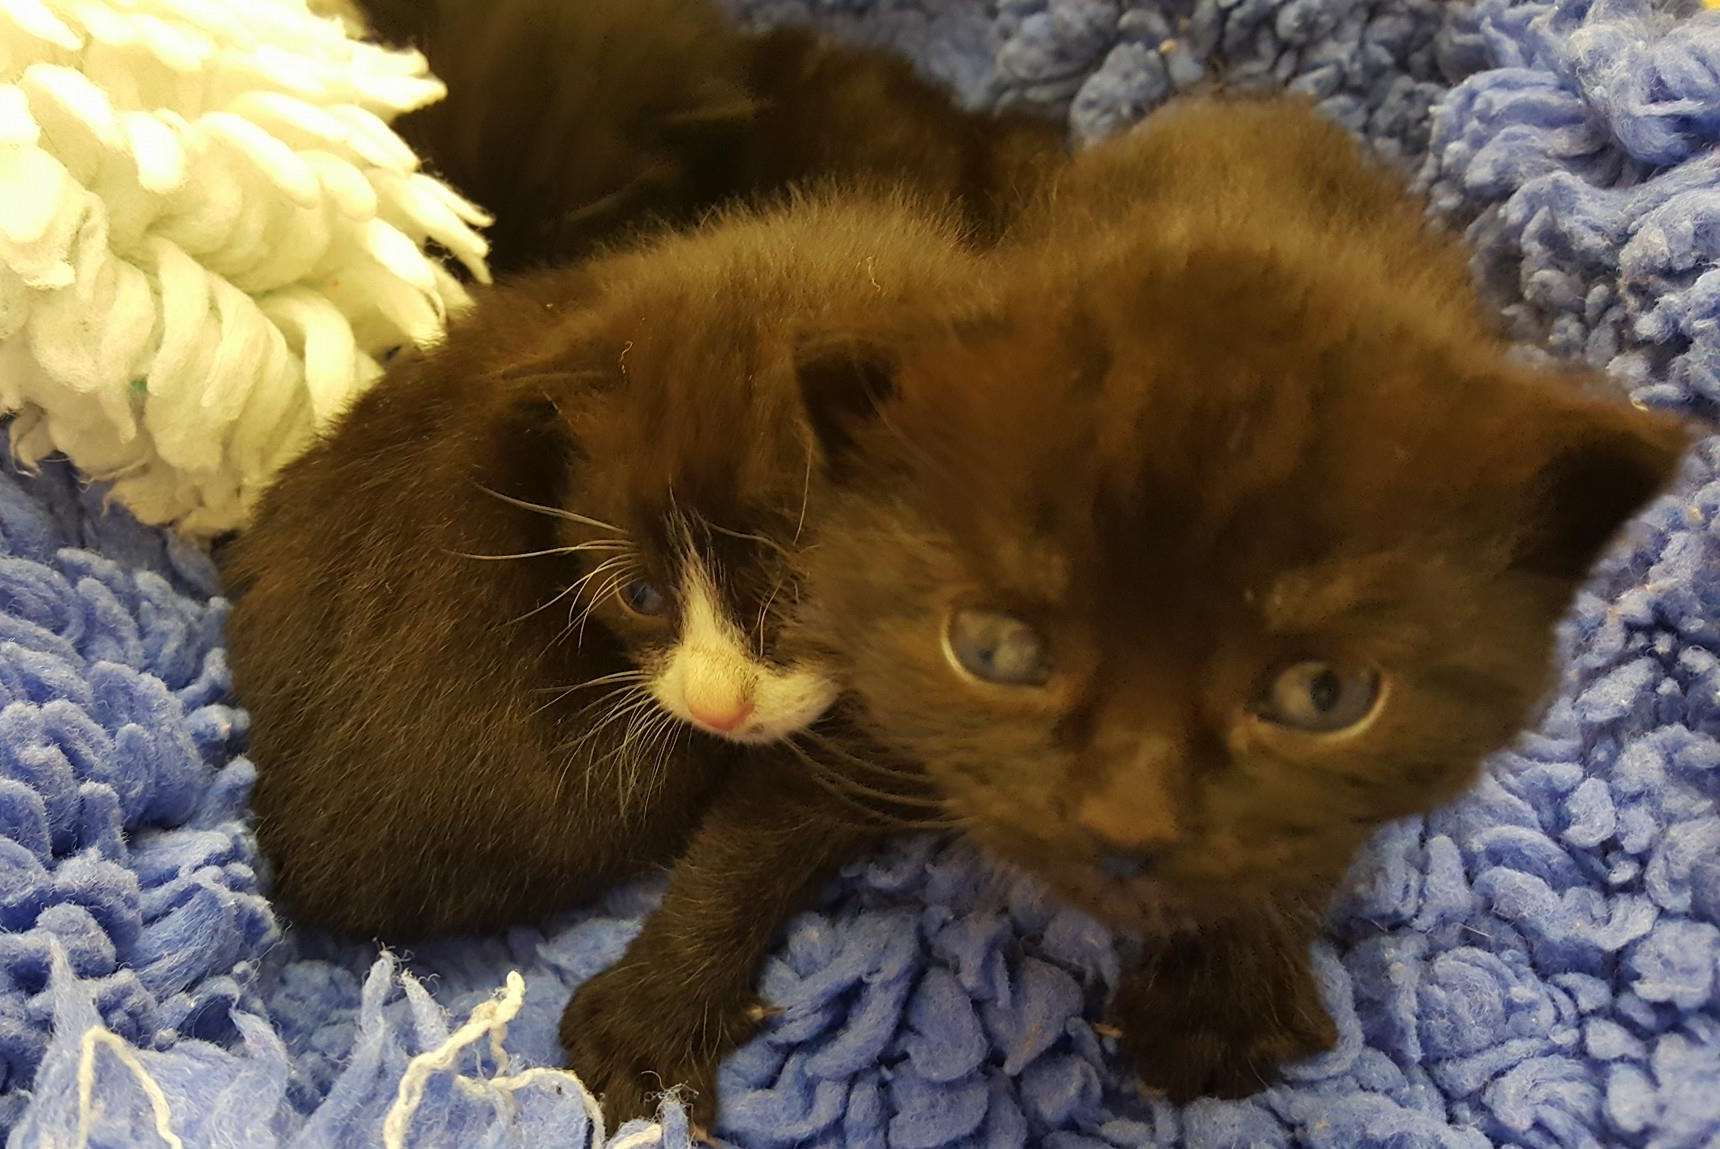 The kittens were found on a building site